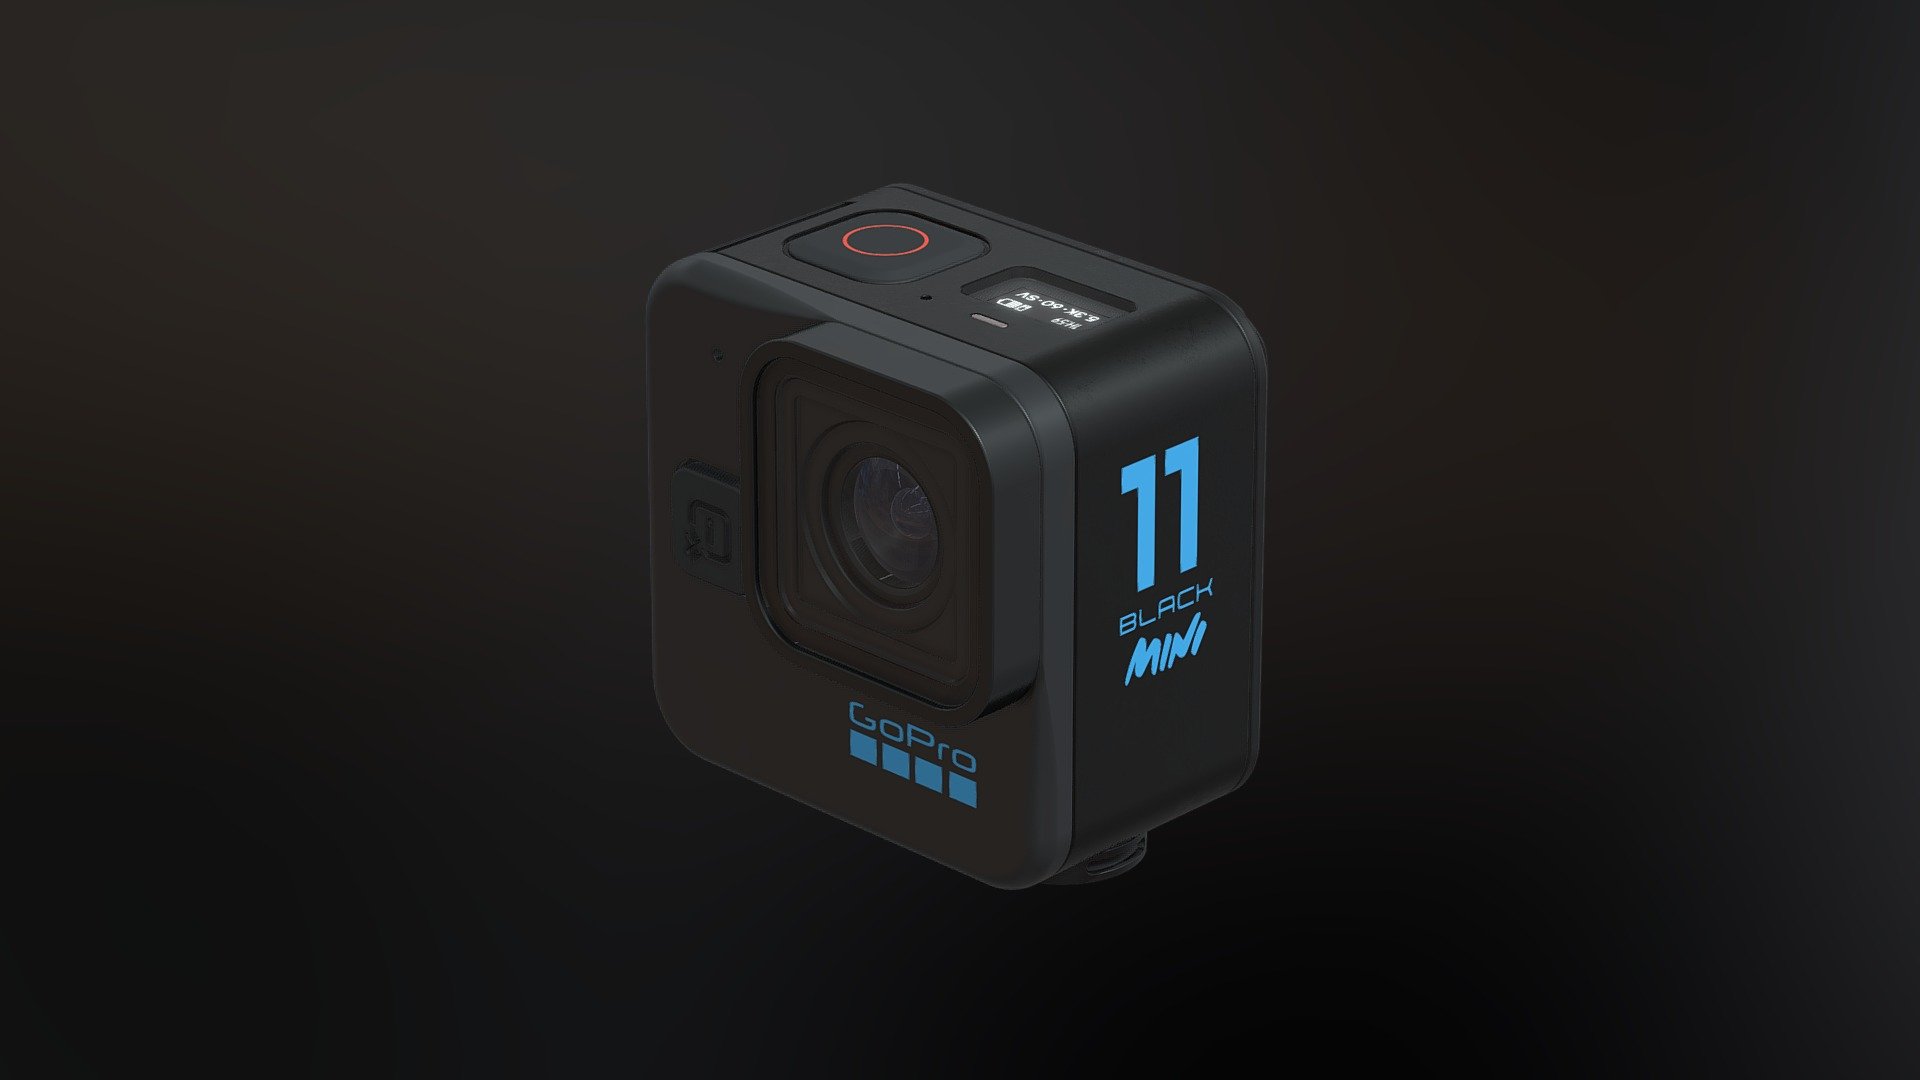 GoPro Hero 11 Black Mini

Modeled in Fusion 360, textured in Substance Painter 3d model